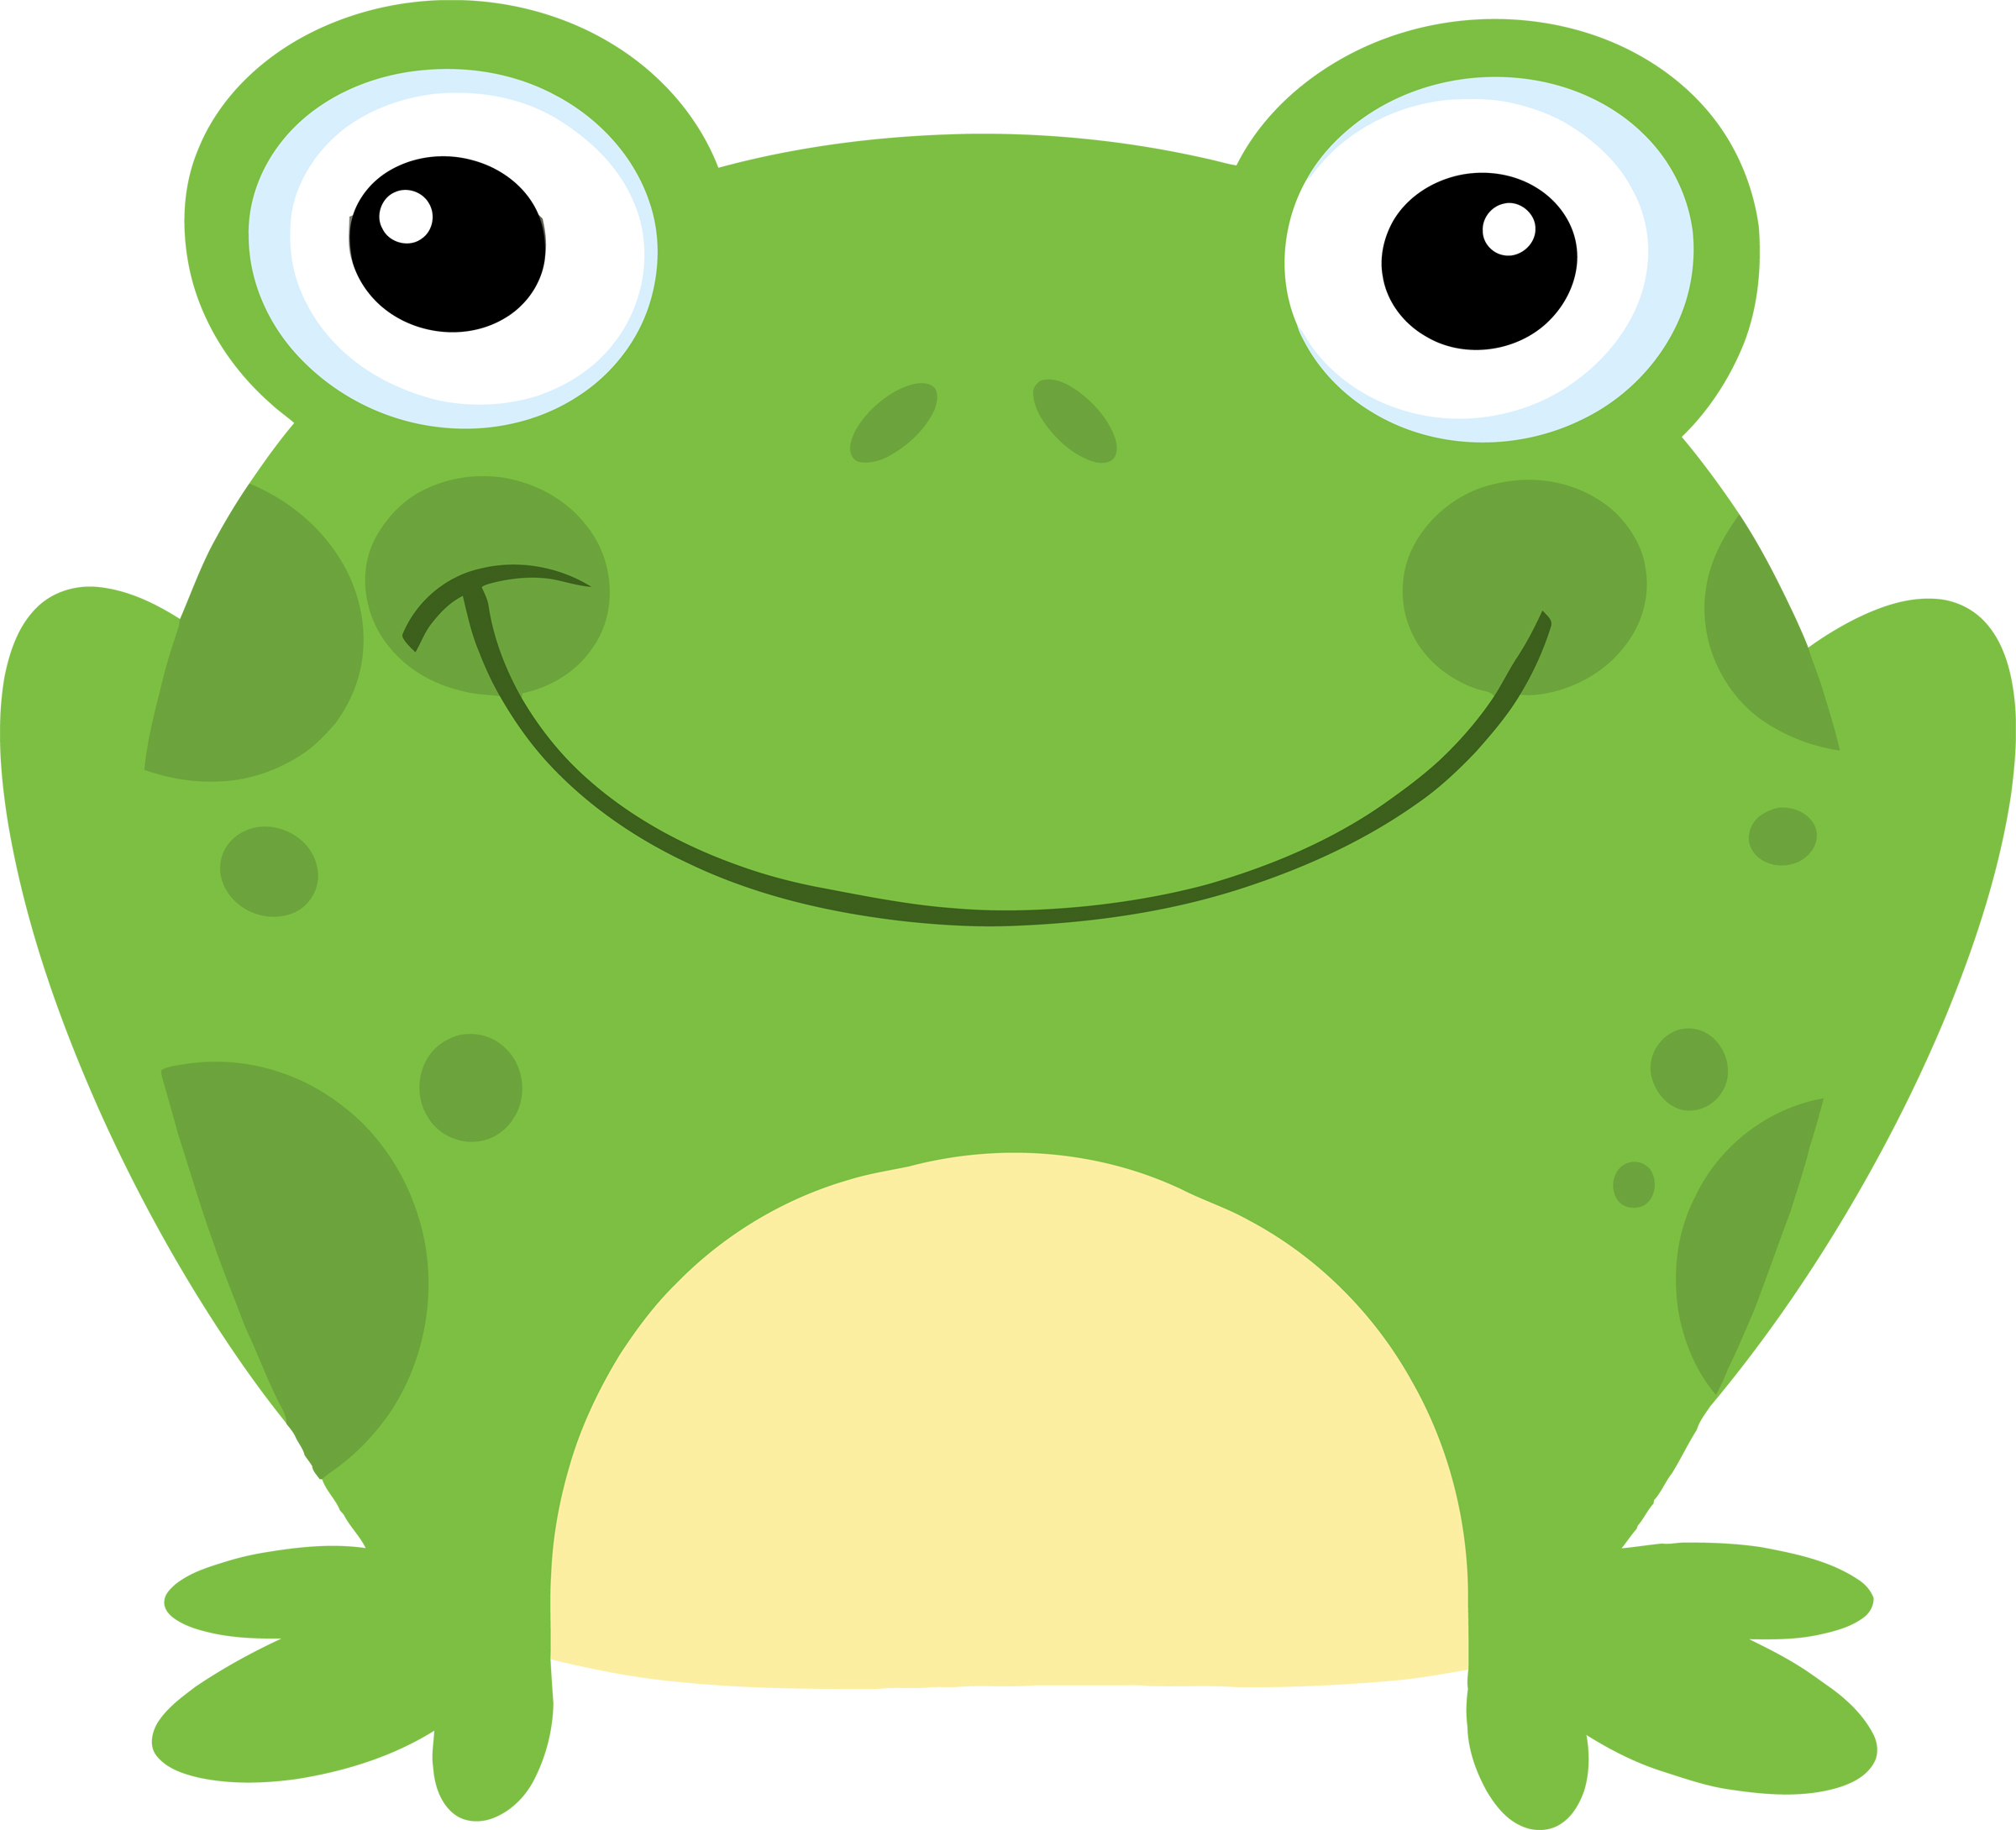 Images Of Cartoon Frog - ClipArt Best